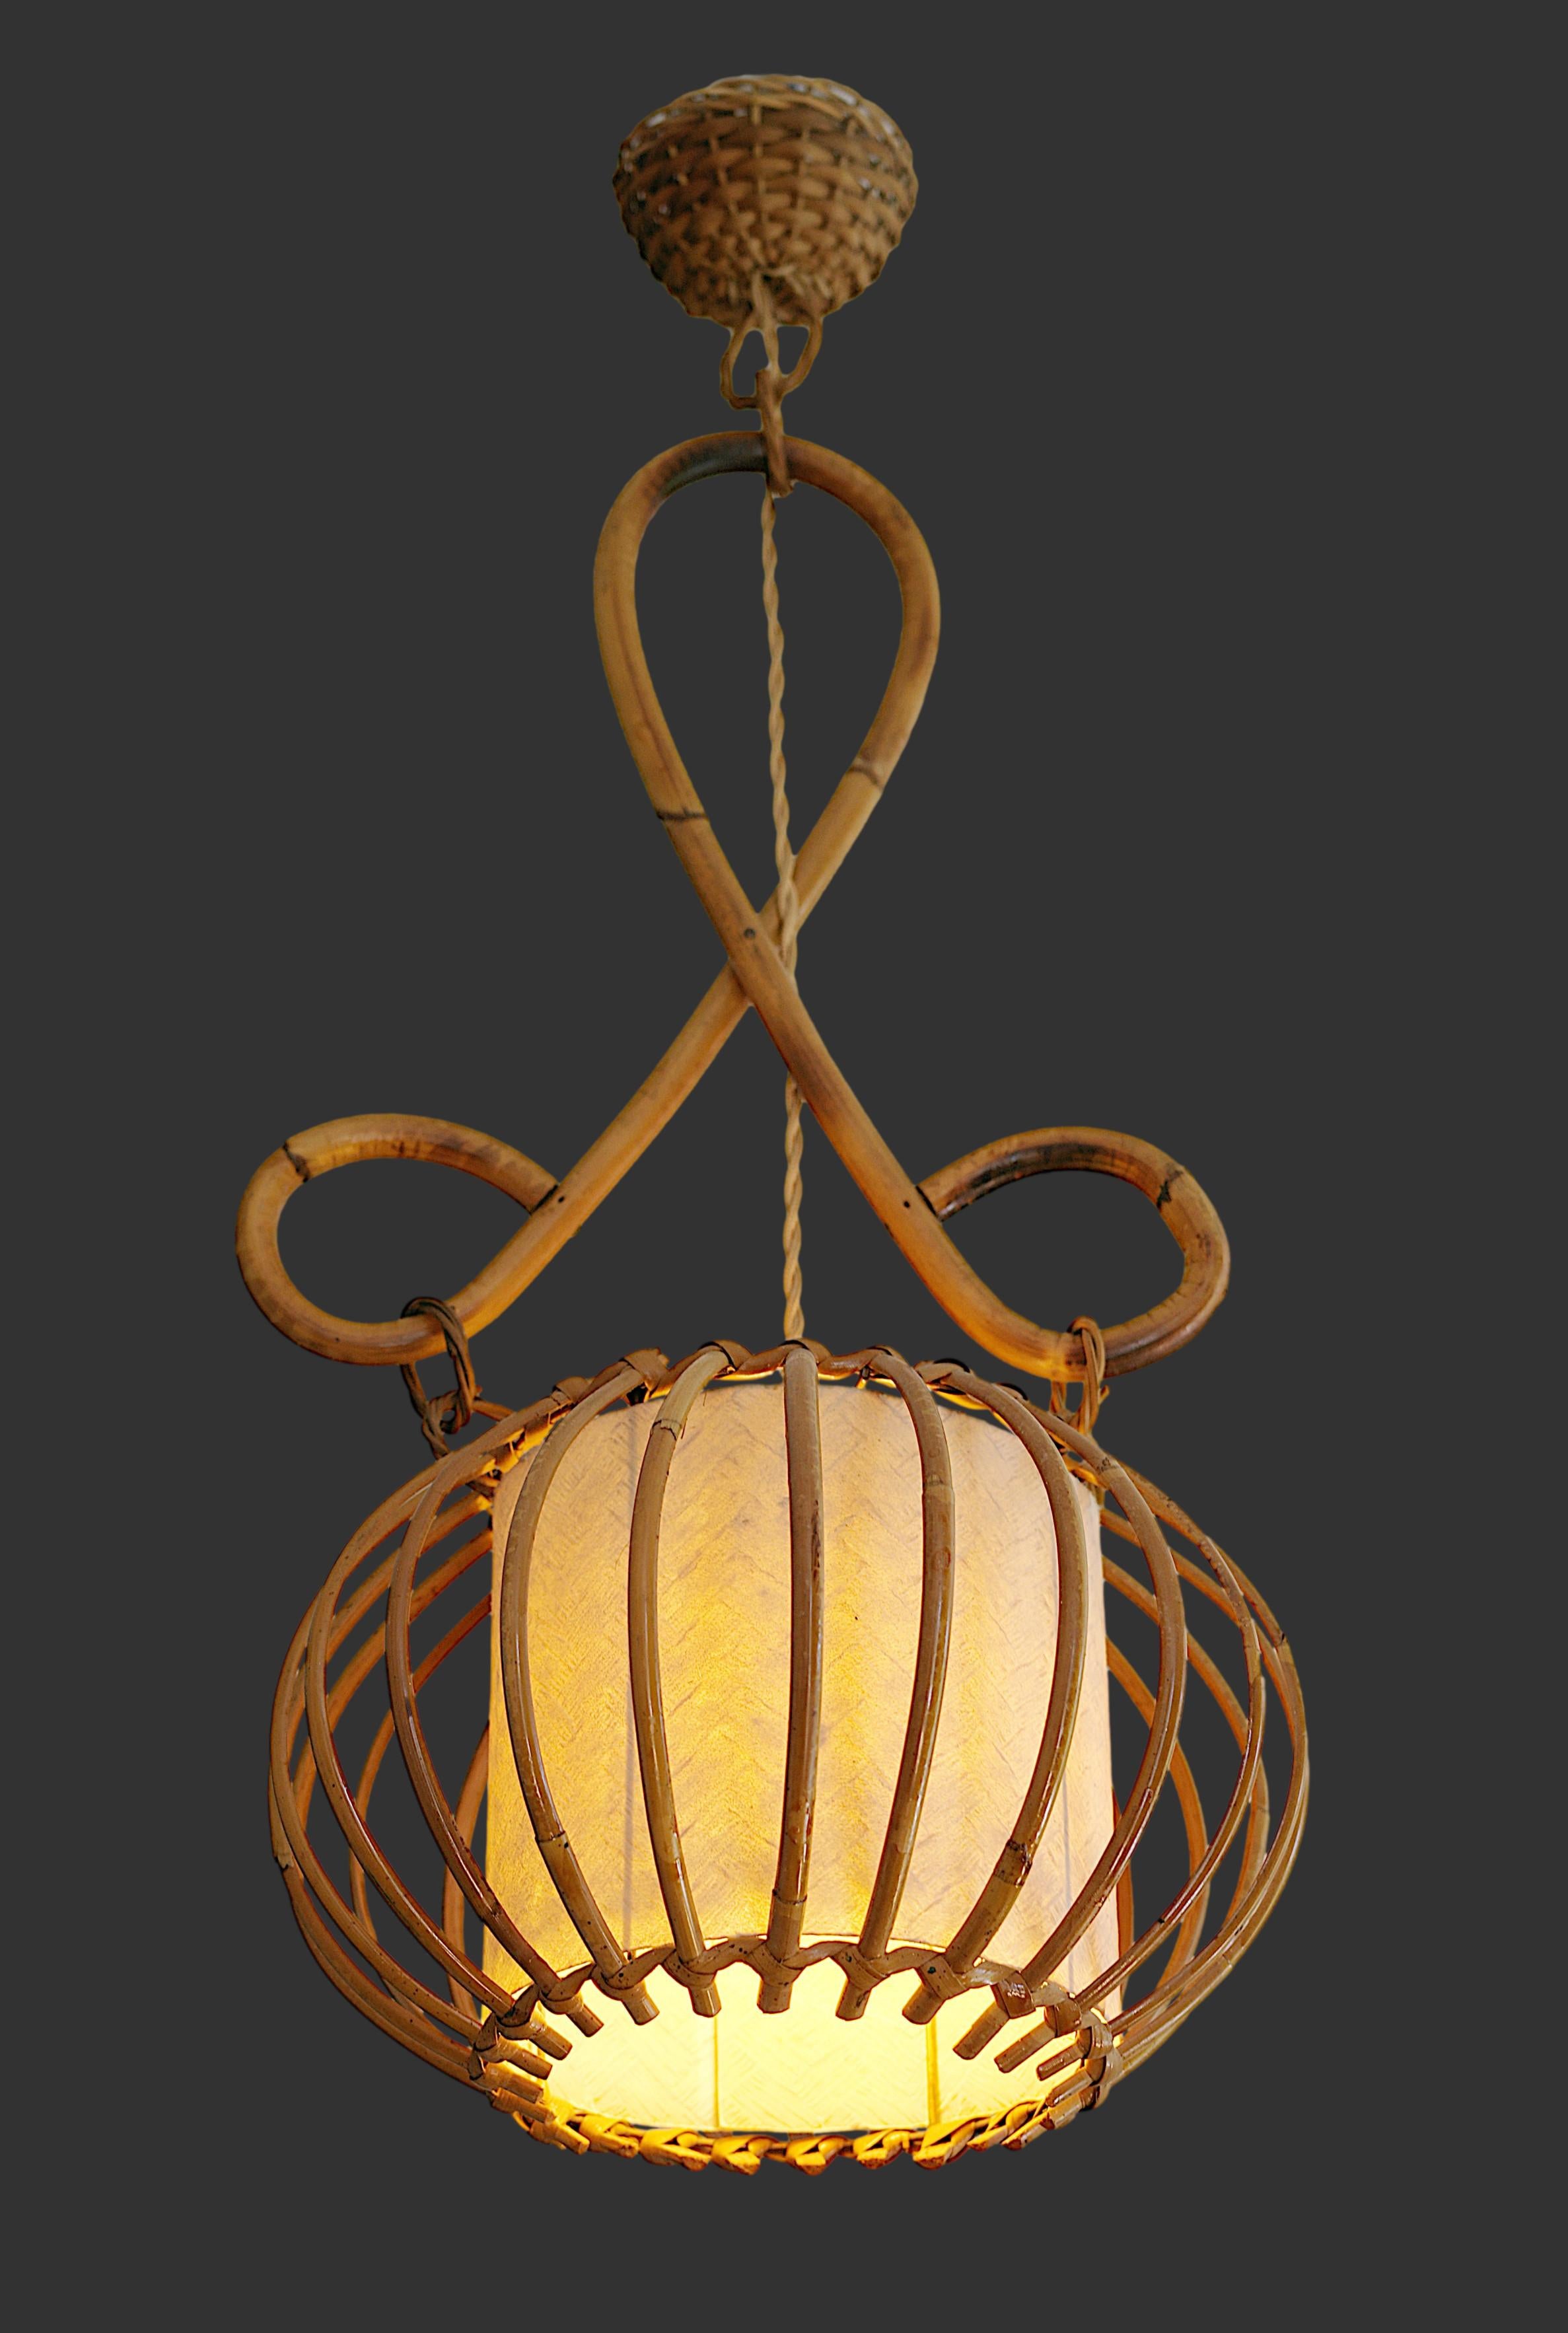 Bamboo lantern by Louis SOGNOT, France, 1950s. Bamboo, rattan and paper. Original faux woven wicker paper shade. Height: 23.5